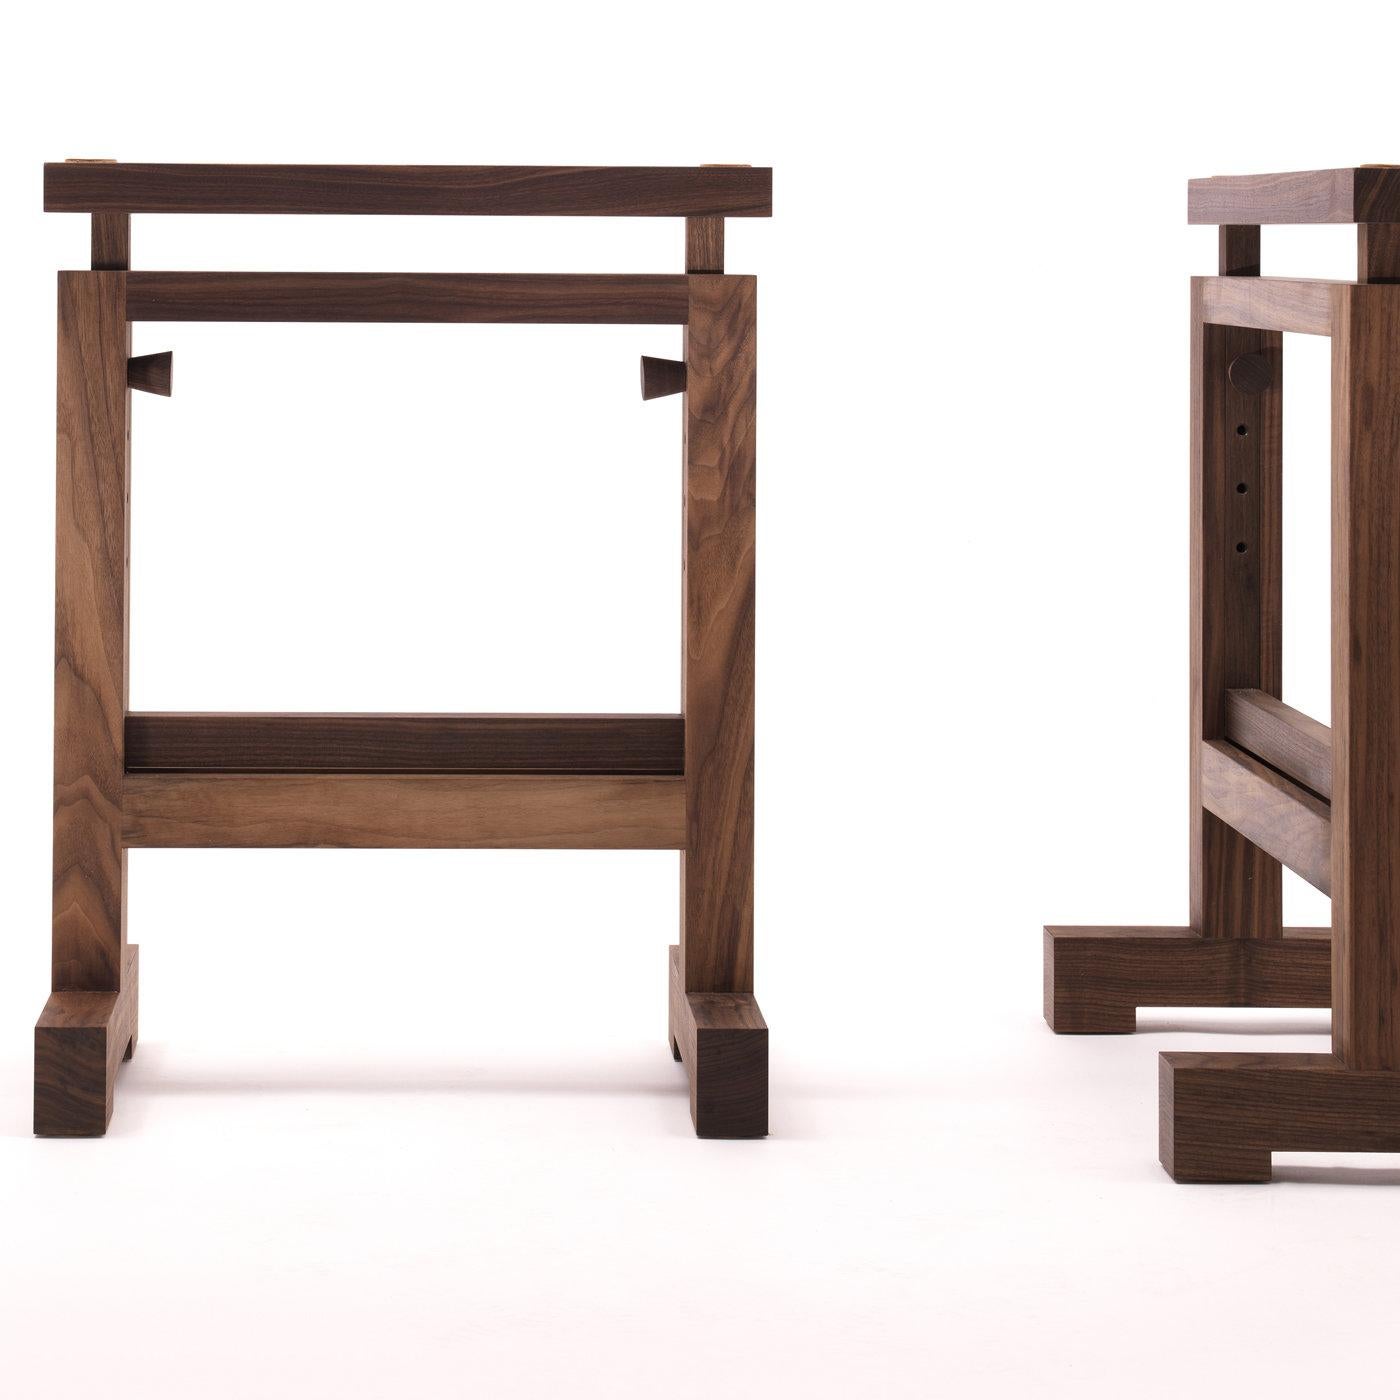 Simple yet sophisticated, this trestle-base is entirely made of solid wood that is treated with linseed oil and beeswax to enhance the natural grain of the wood. The trestle features a frame with two solid legs and transverse feet as well as